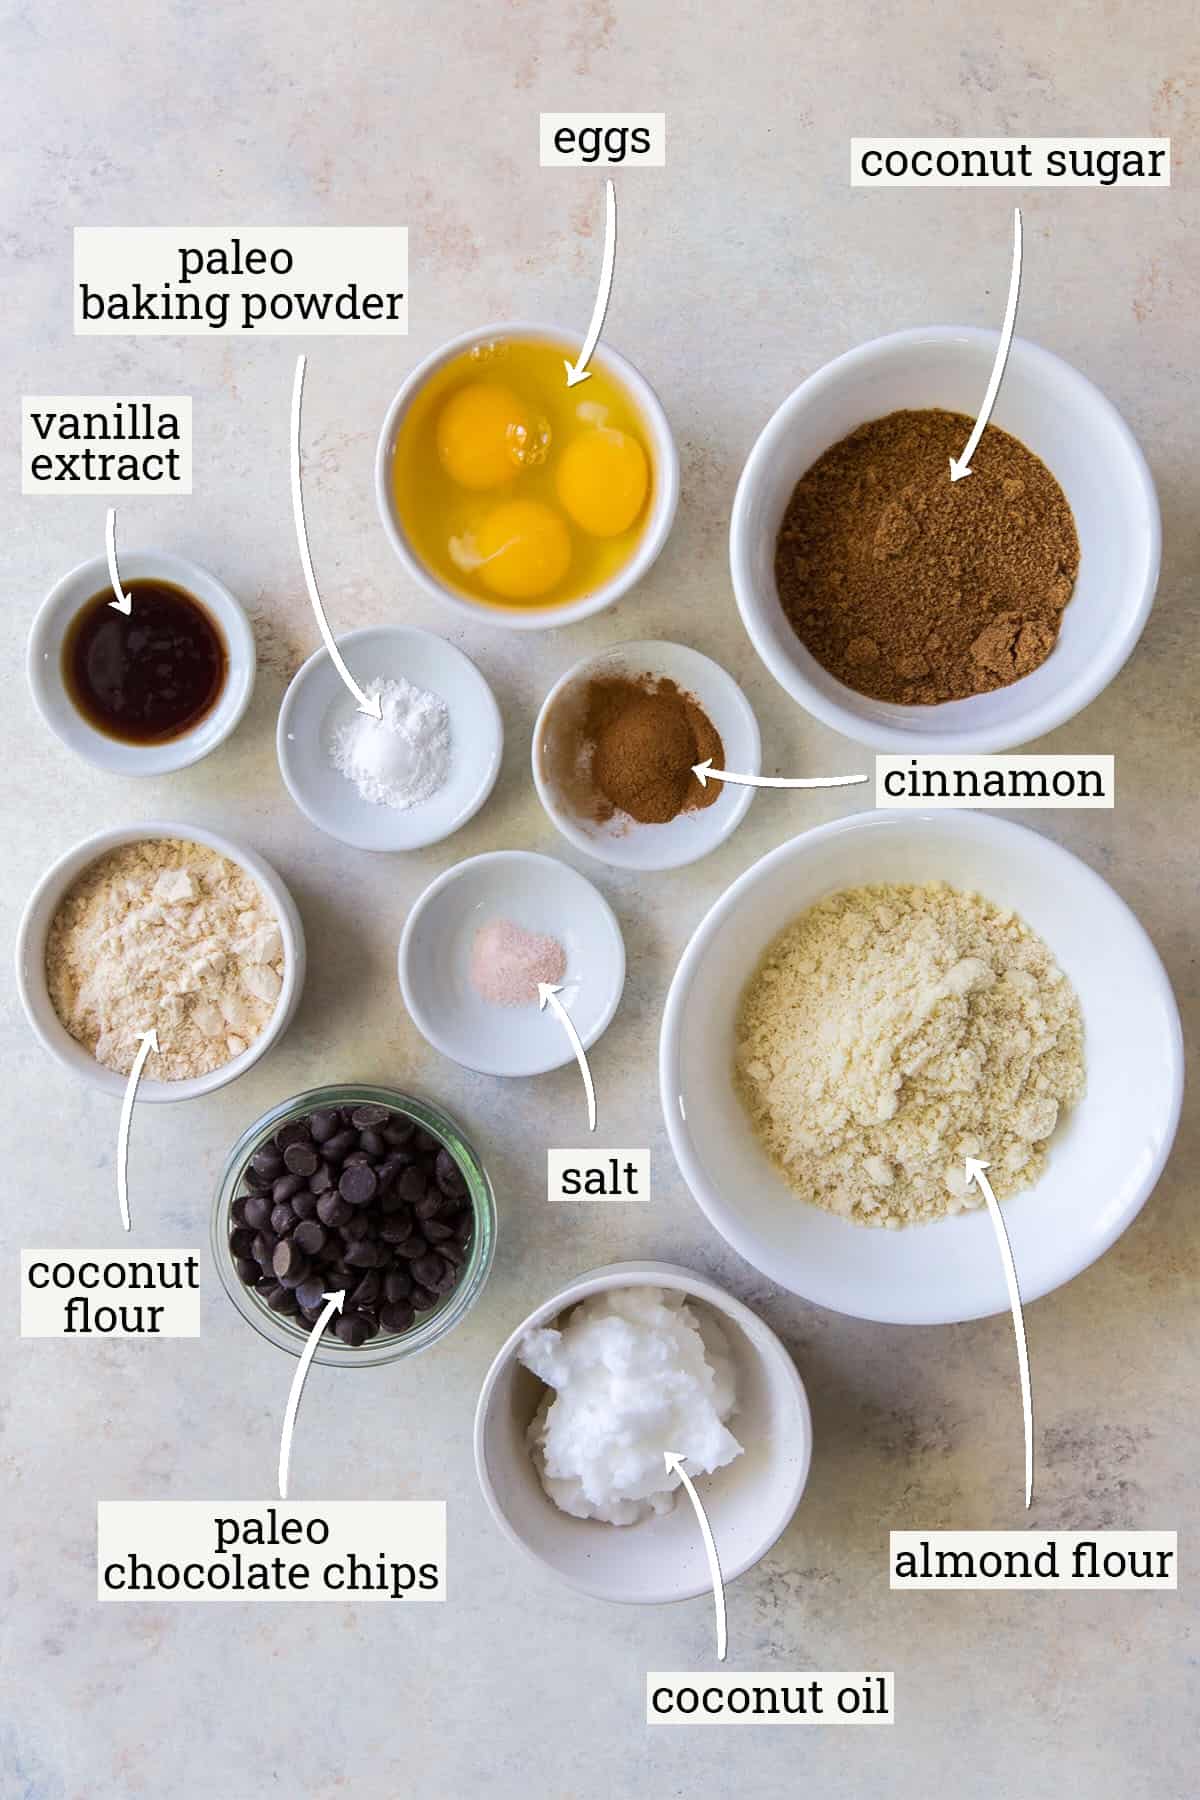 ingredients for paleo chocolate chip cookies